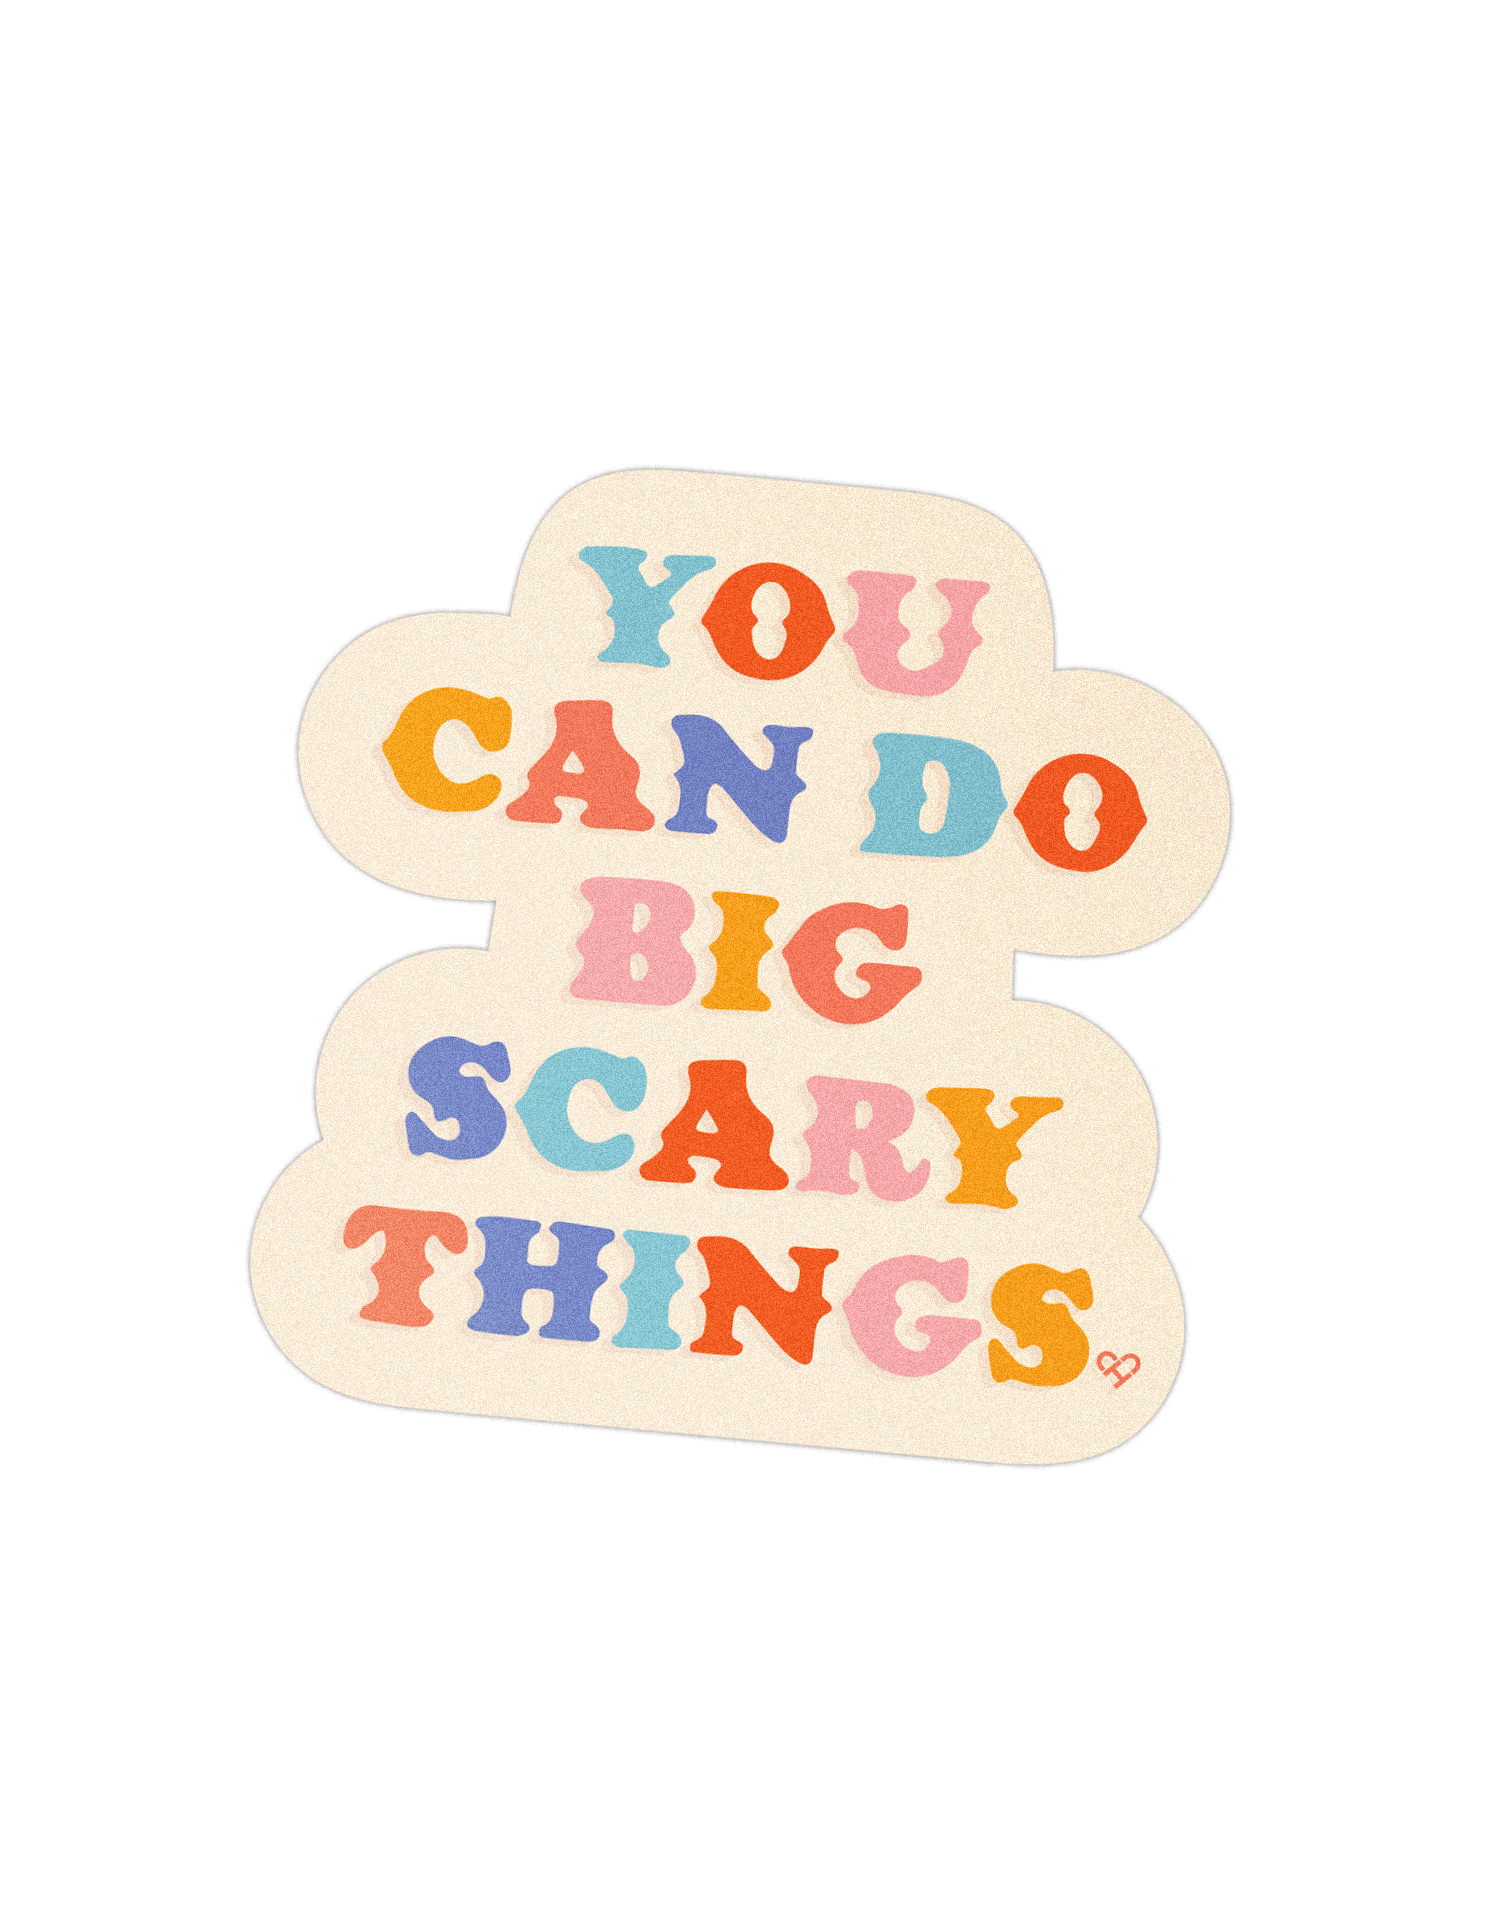 Big-Scary-Things.png